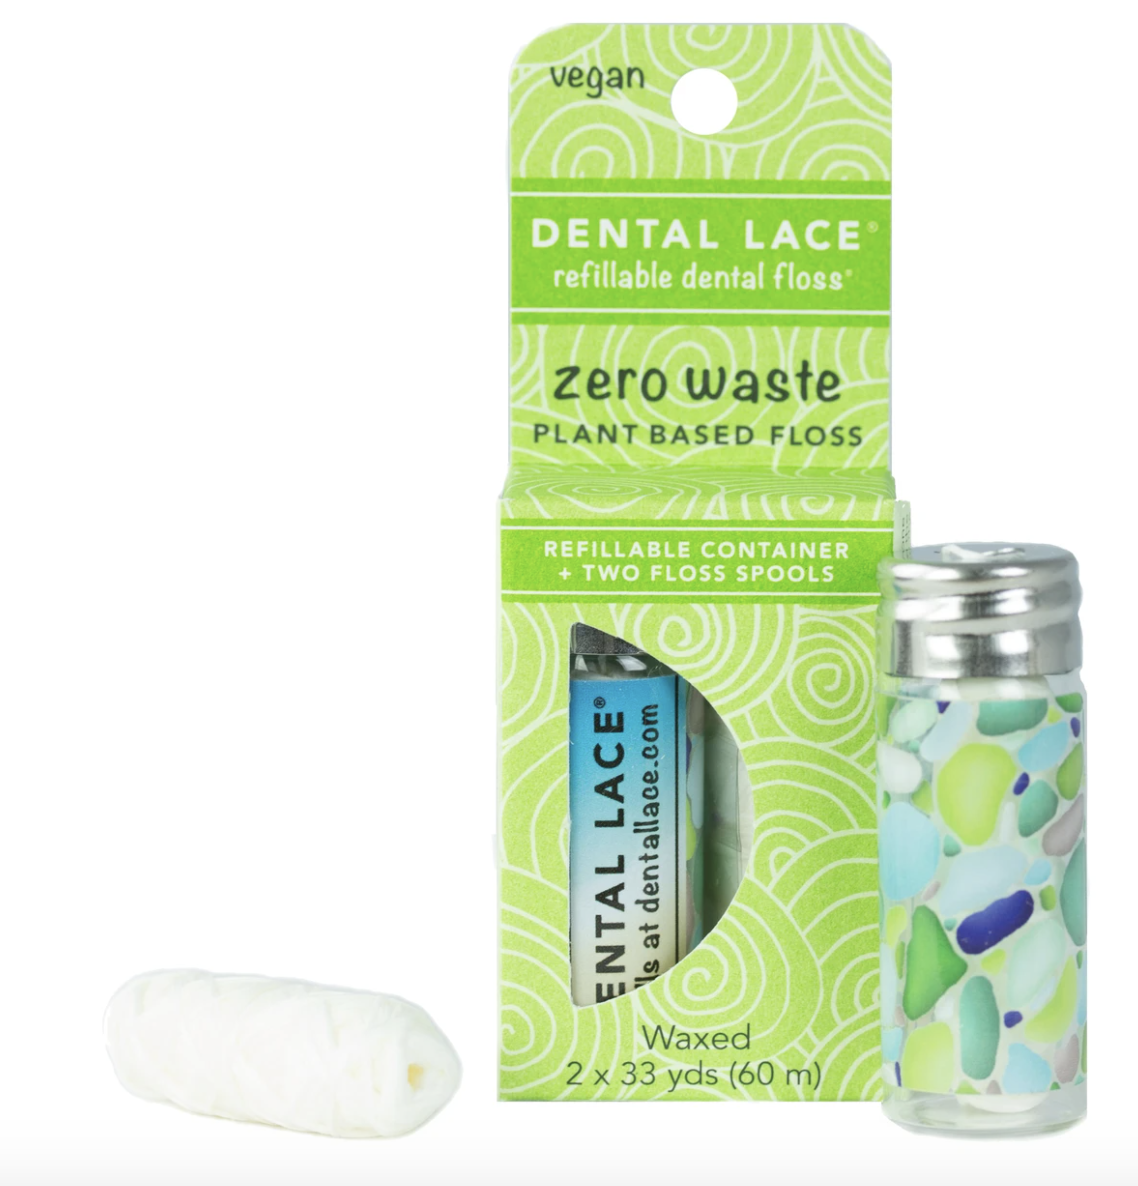 Grey Dental Lace Floss and Refill Kit - 1 grey DL floss in a glass jar and  6 refills (3 packs of two)